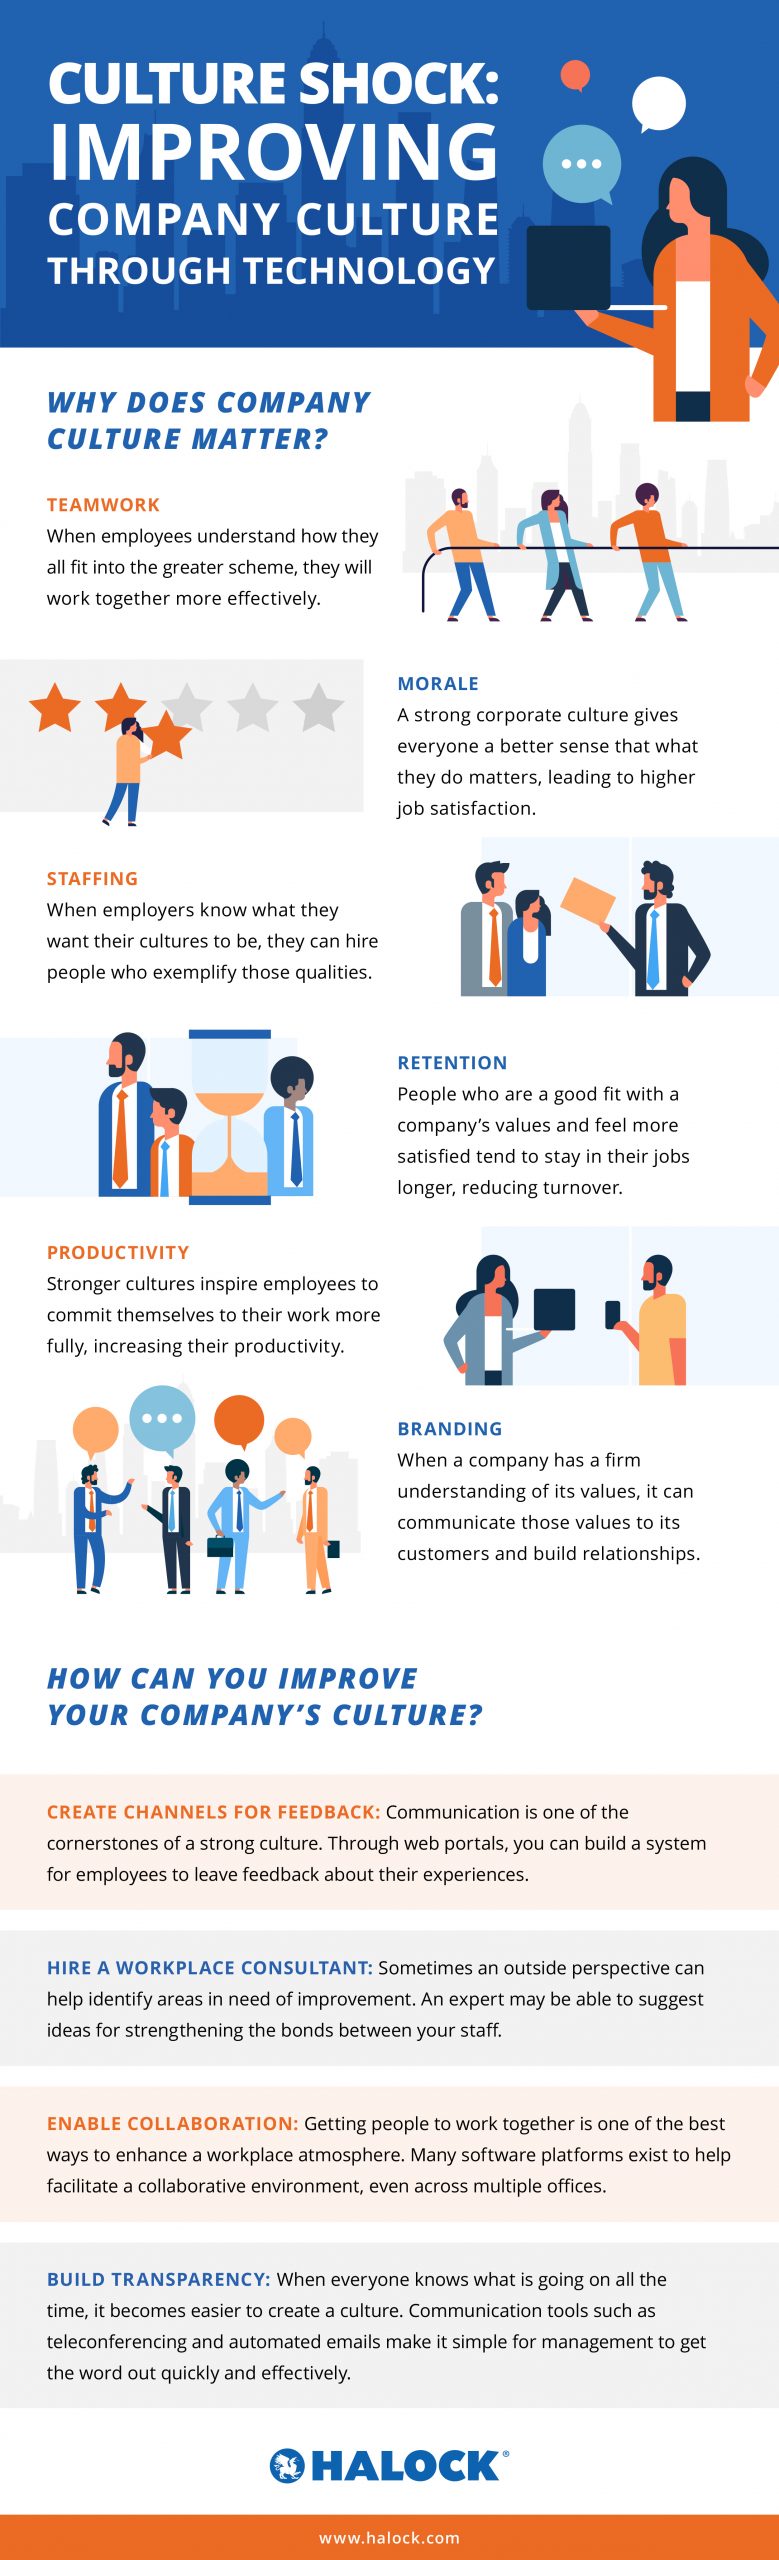 halock company culture through technology infographic